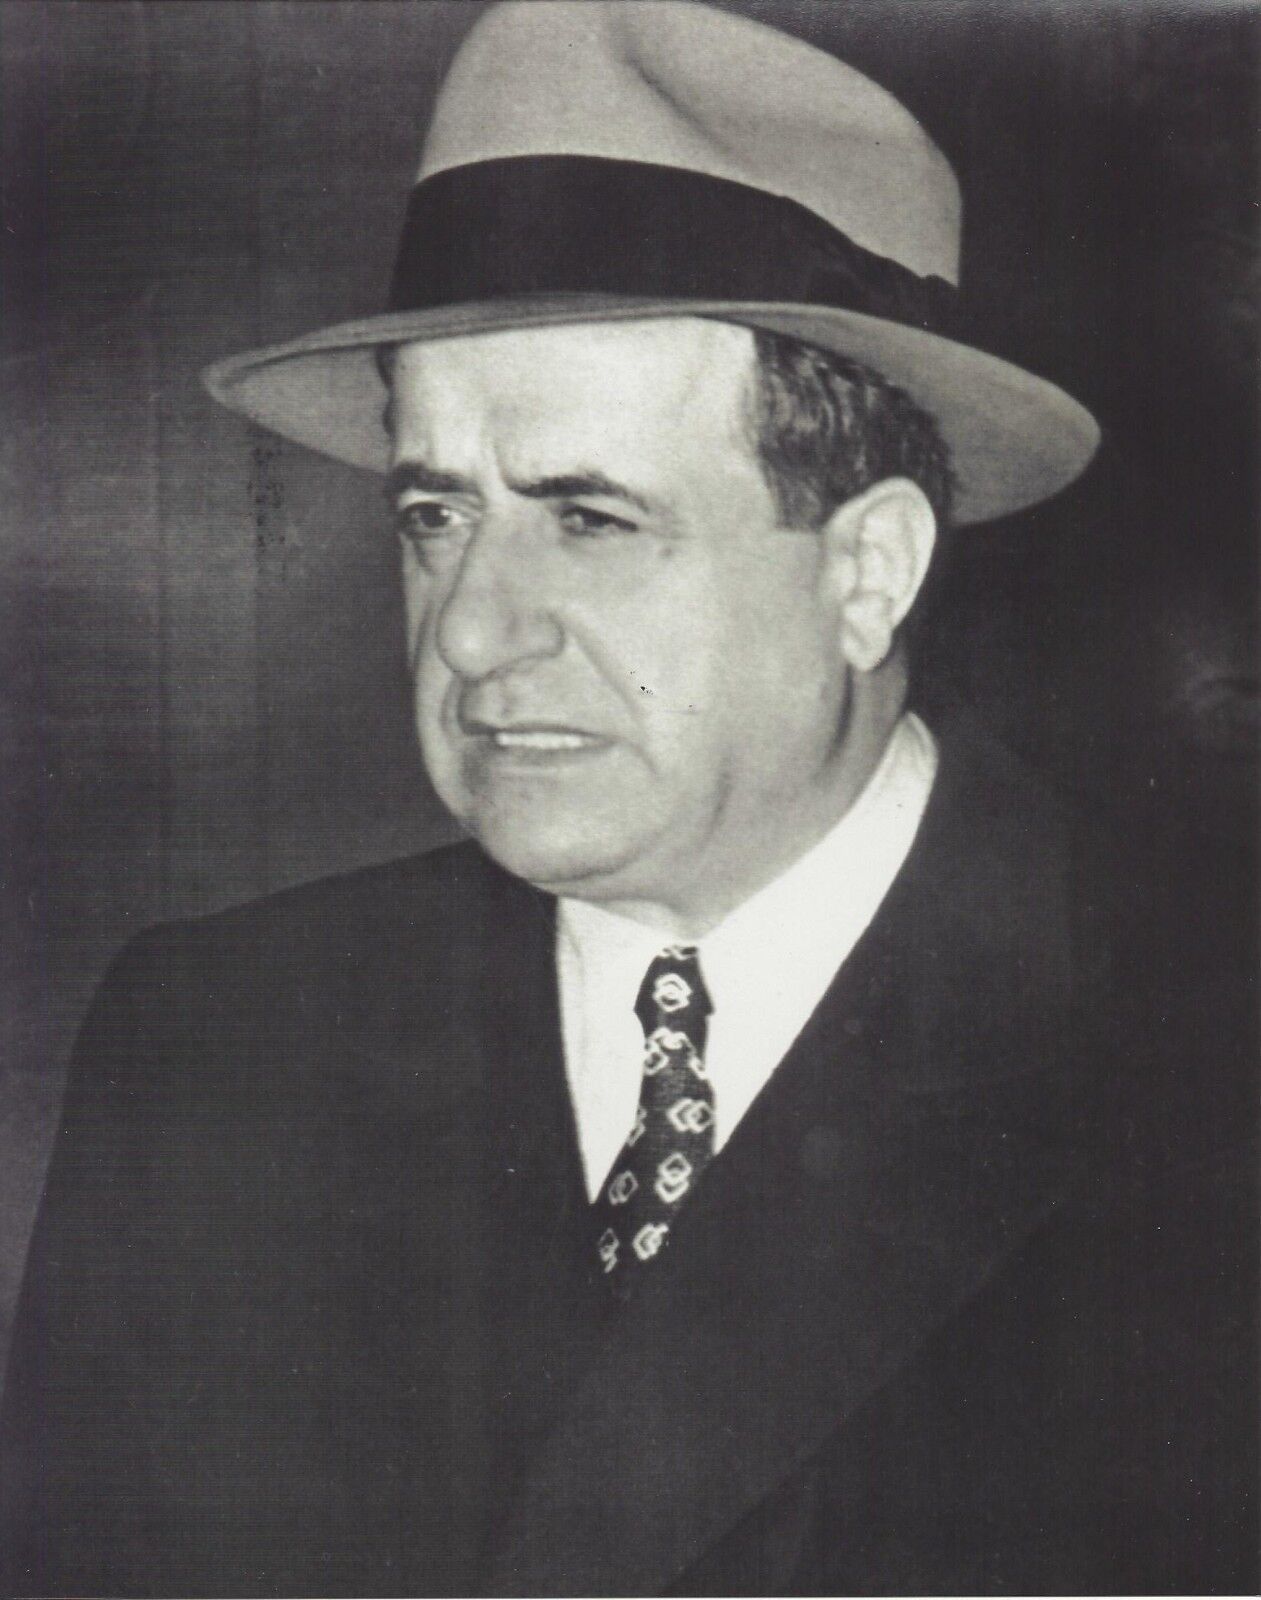 ALBERT ANASTASIA 8X10 Photo Poster painting MAFIA ORGANIZED CRIME MOBSTER MOB PICTURE